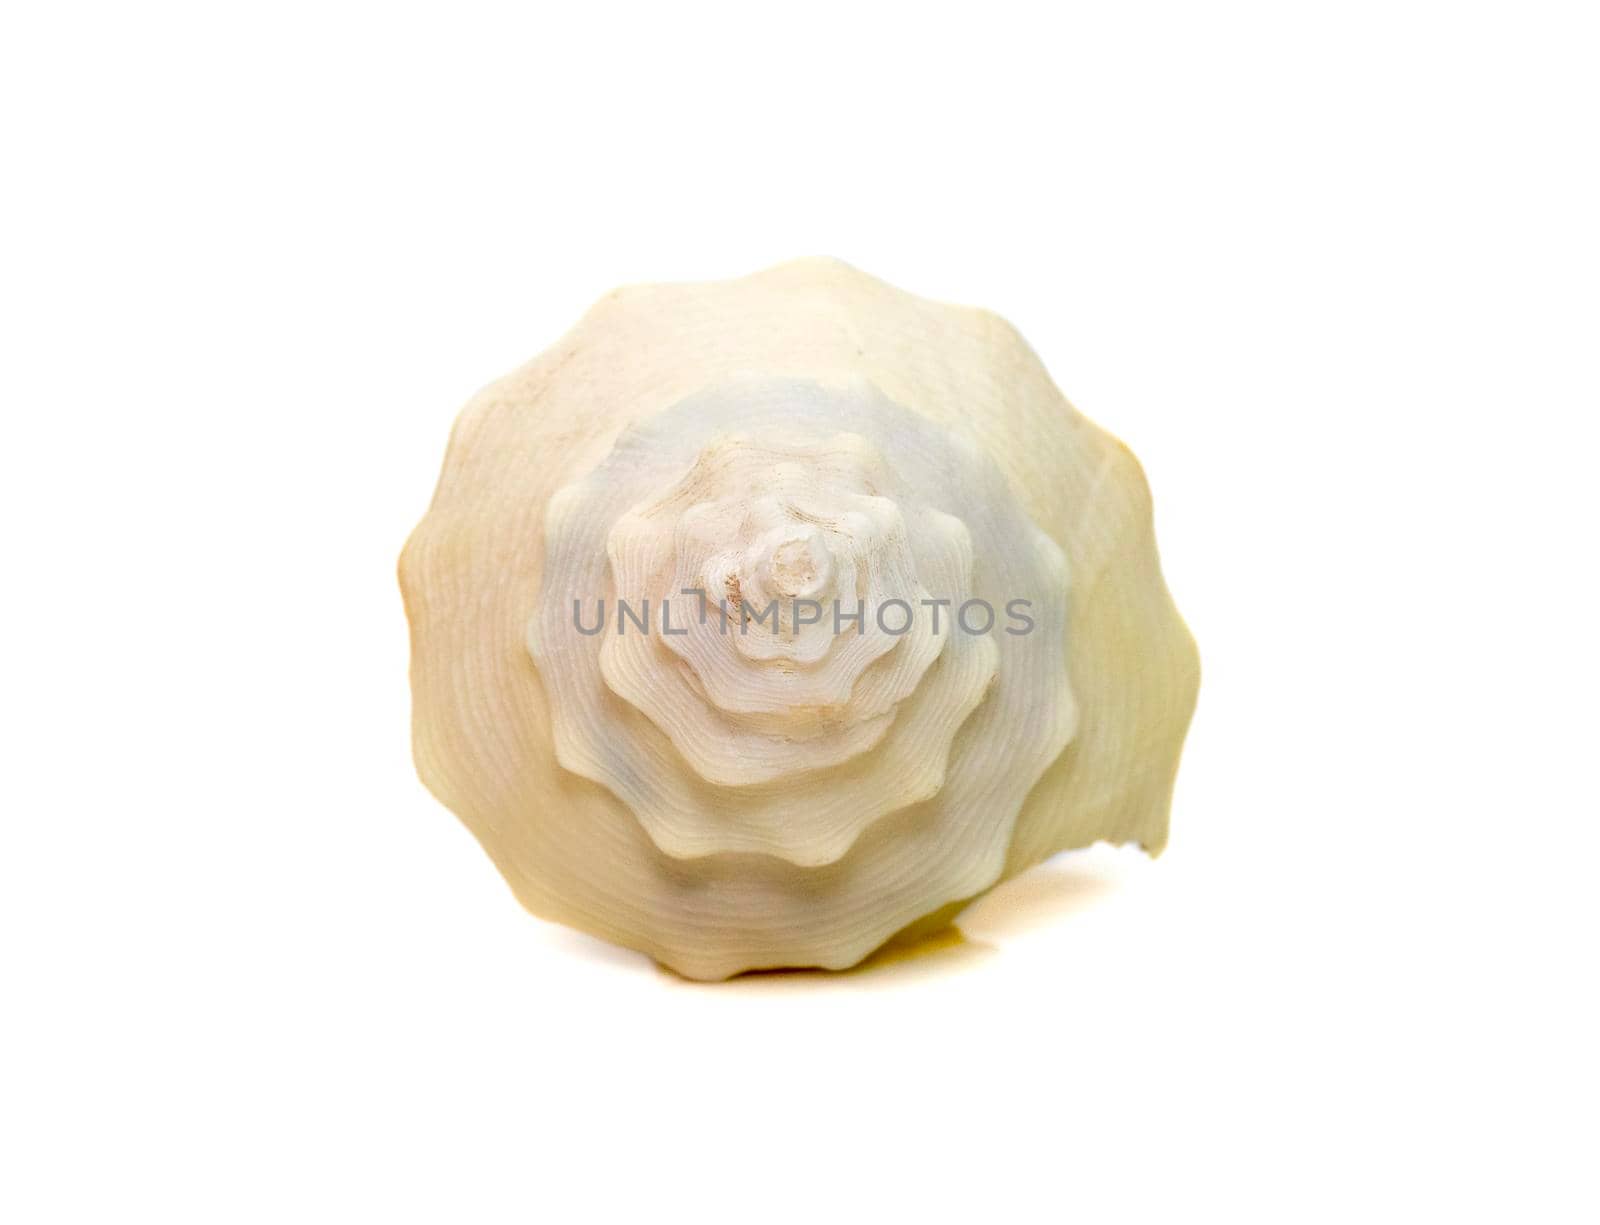 images of spiral white conch shell isolated on white background. Undersea Animals. Sea Shells.